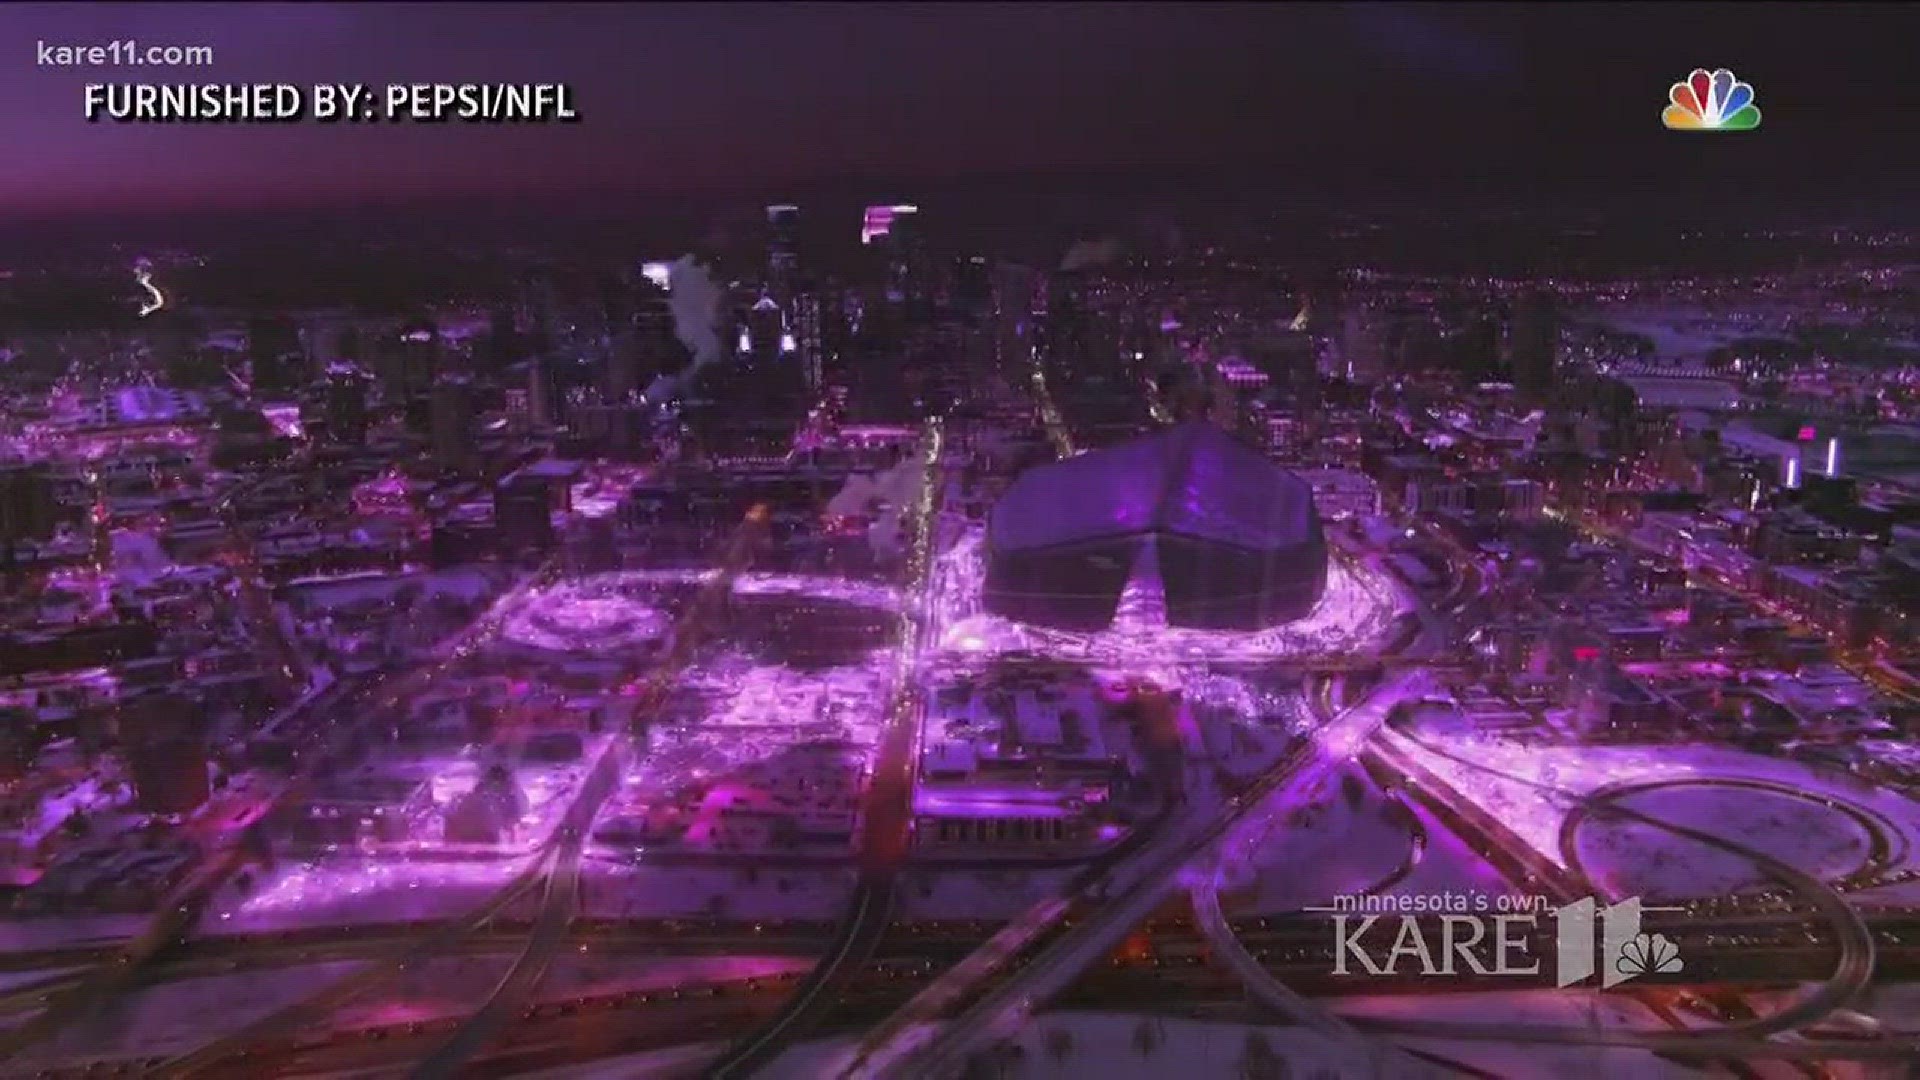 The Super Bowl Halftime Show had Minnesotans brimming with pride. http://kare11.tv/2Edbpc1